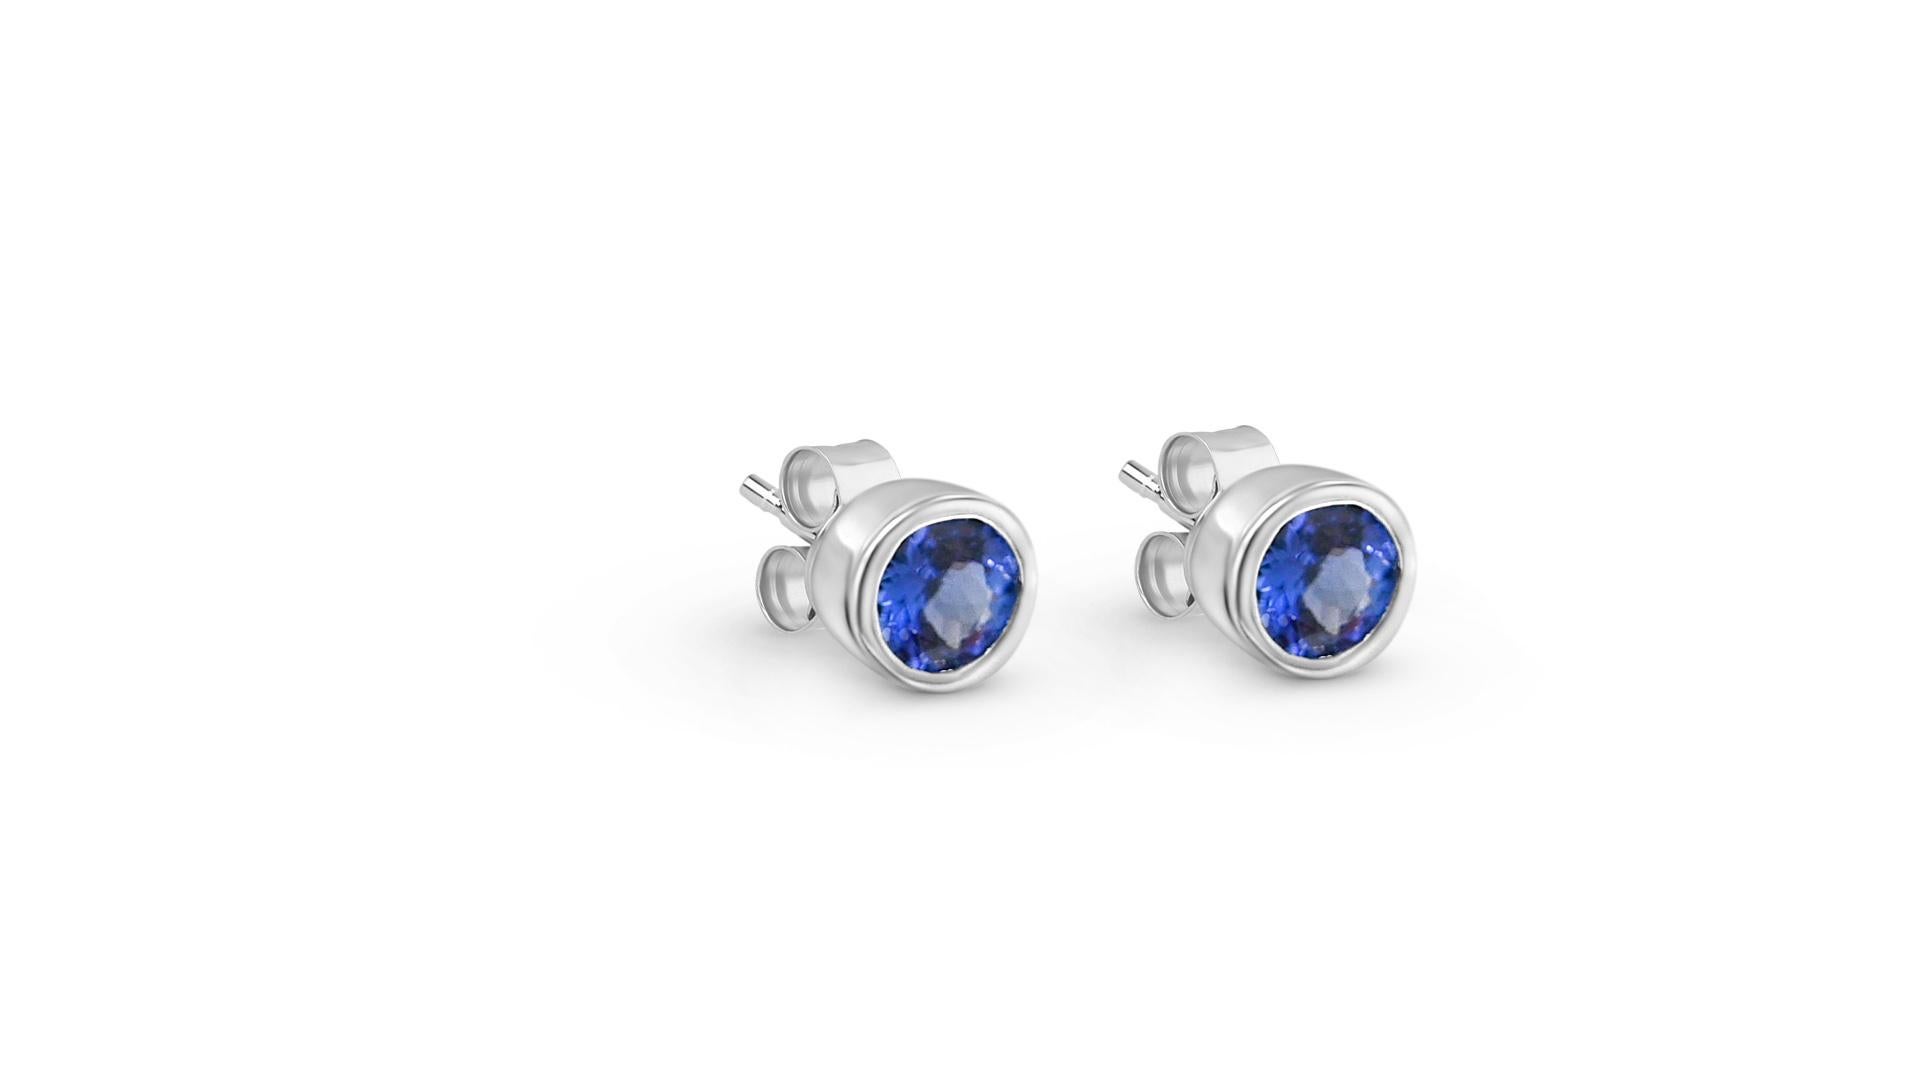 Welcome to Blue Star Gems NY LLC! Discover popular engagement earrings & wedding Earrings designs from classic to vintage inspired. We offer Joyful jewelry for everyday wear. Just for you. We go above and beyond the current industry standards to